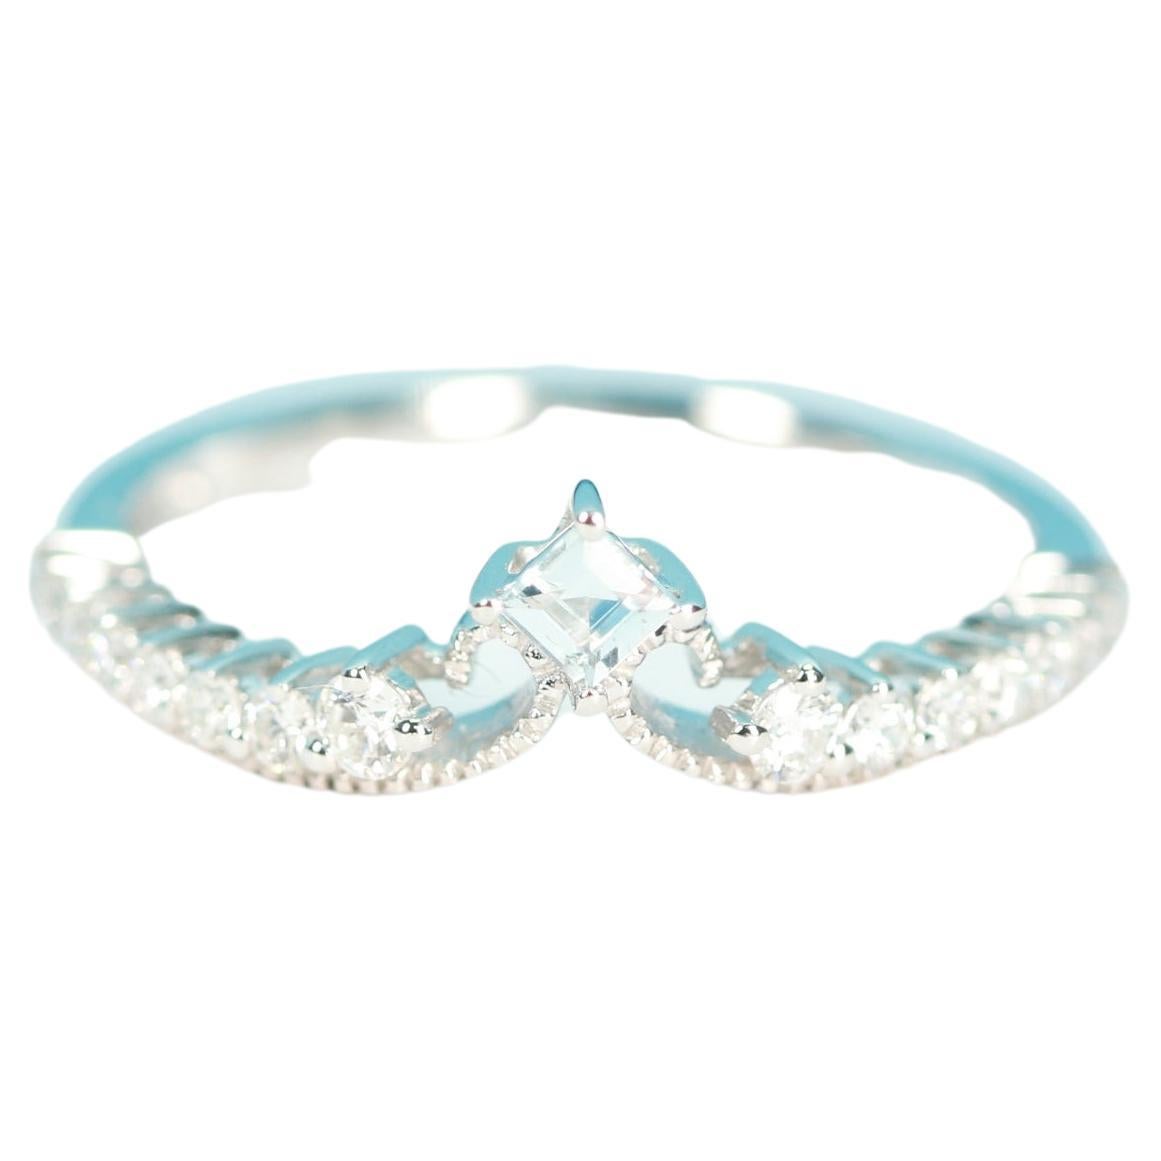 Stunning, timeless and classy eternity Unique Ring. Decorate yourself in luxury with this Gin & Grace Ring. The 18K White Gold jewelry boasts with Round-cut 1 pcs 0.07 carat Aquamarine and Natural Round-cut white Diamond (16 Pcs) 0.23 Carat accent